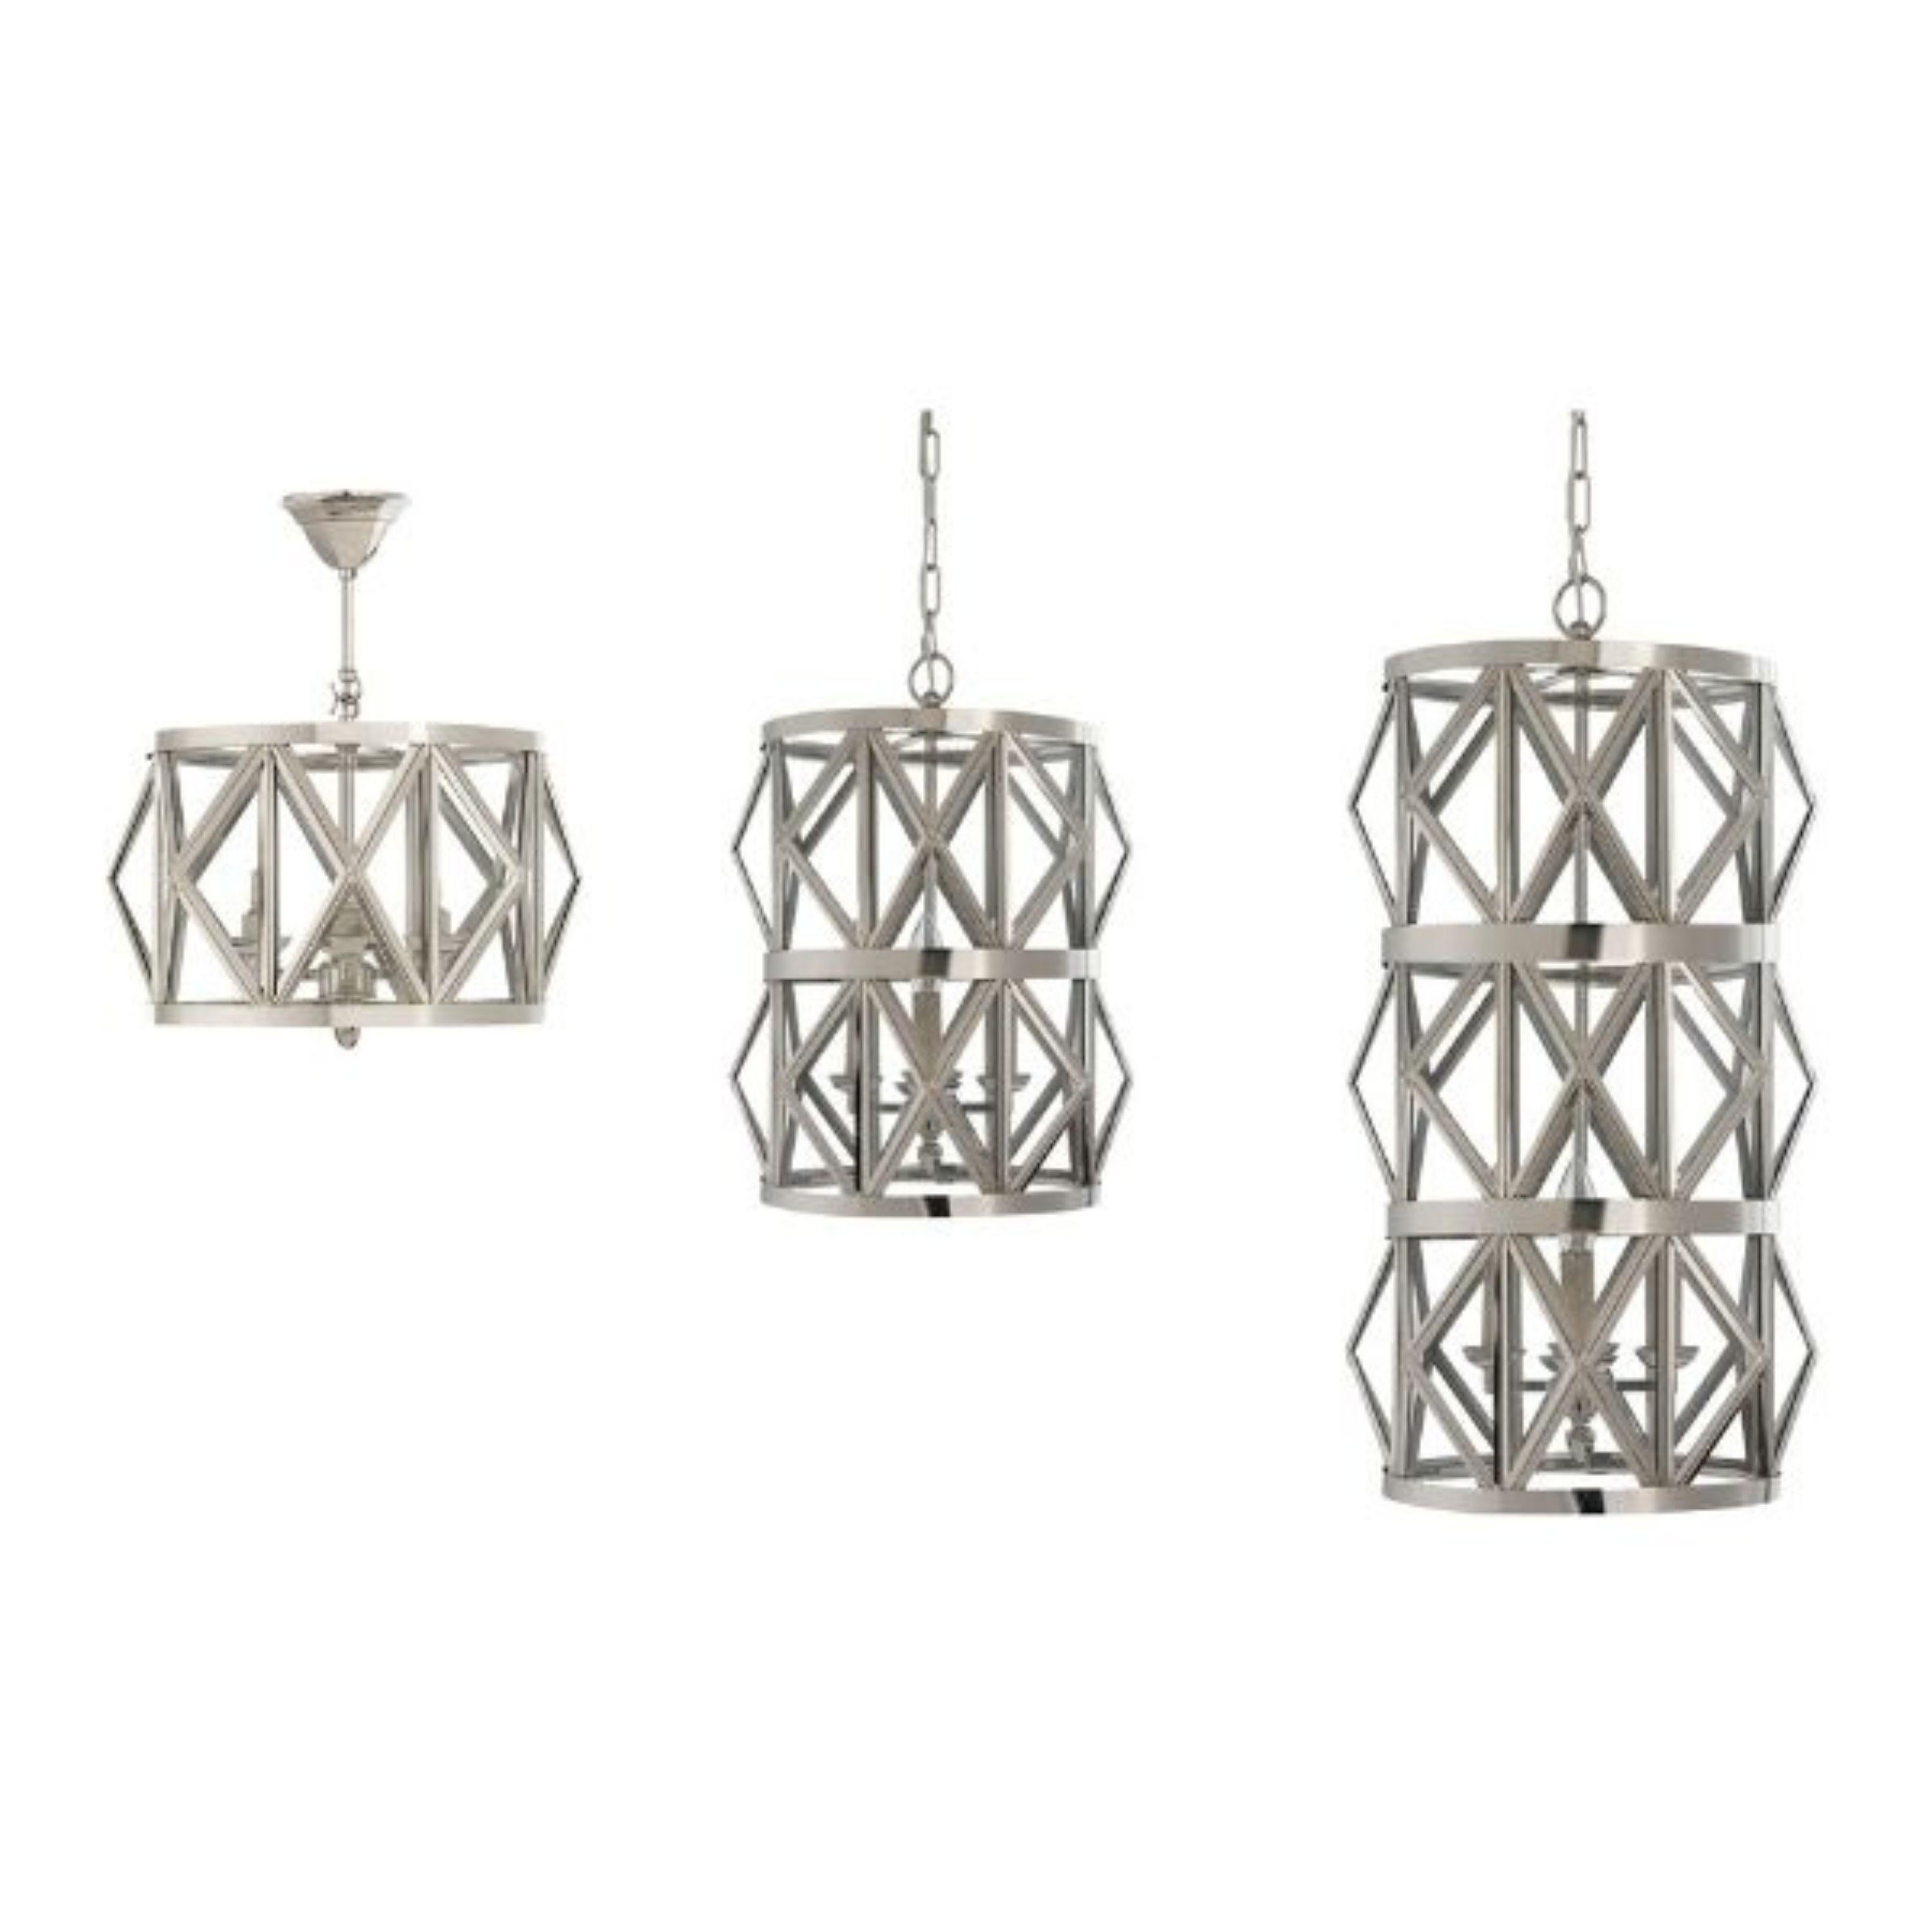 Geometrie 157 medium nickel brass chandelier belongs to the Timeless collection which includes classic and timeless lamps, the clean lines and geometries of brass and glass of this chandelier expand in height from small to large size. Modernity